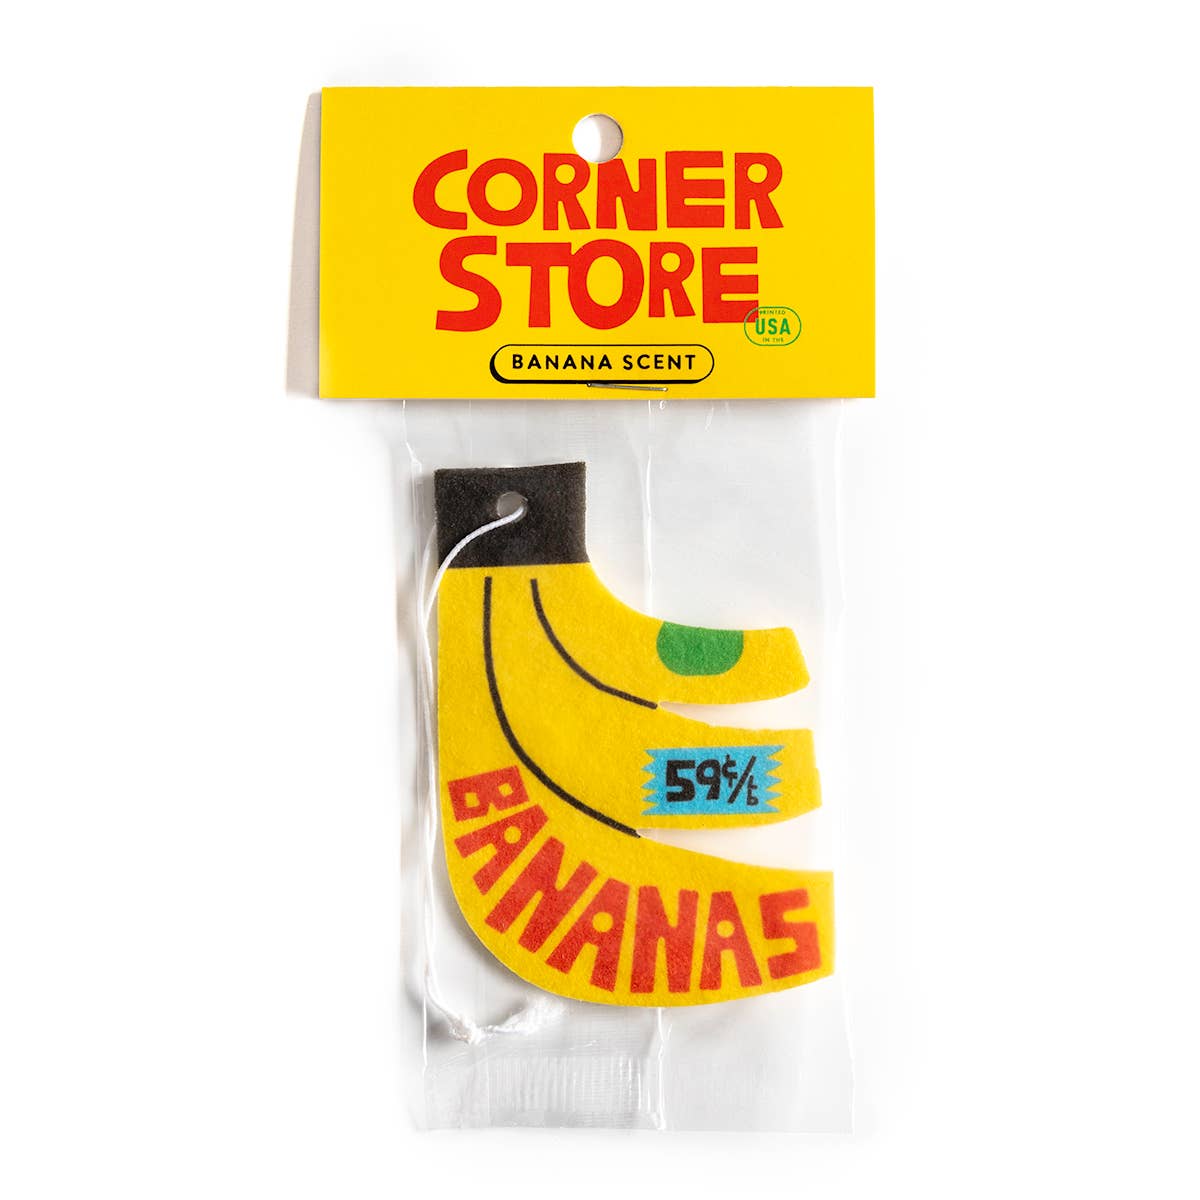 Banana scented air freshener in the shape of three bananas in a bunch with red text "Bananas" and fake price tag "59c/lb"